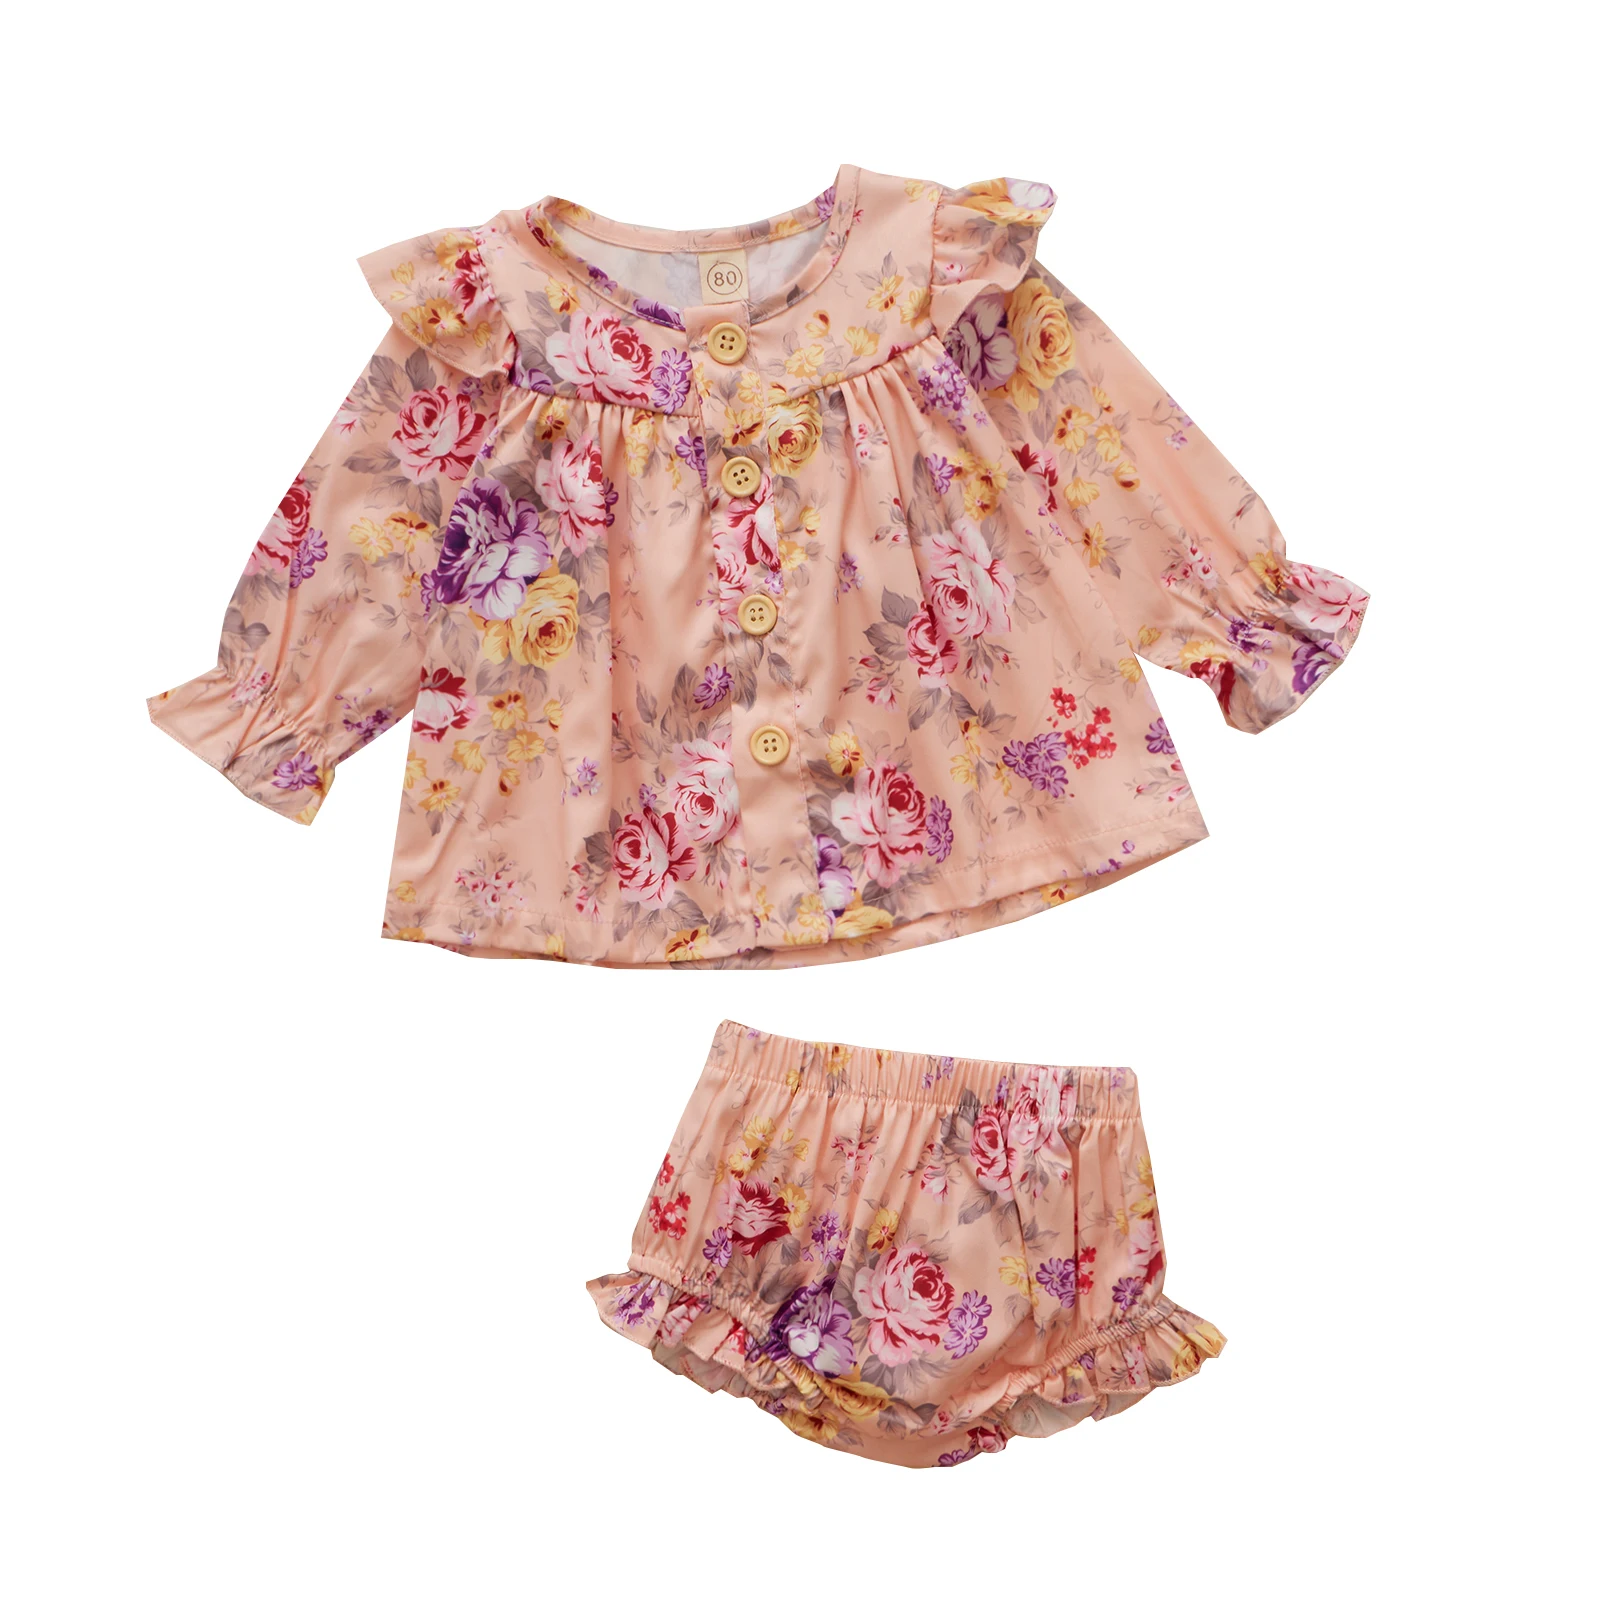 

Infant Kids Baby Girls Floral Print Clothes Set, Long Sleeve Large Hem O-neck Tops+Short Pants with Ruffles 6M-4T